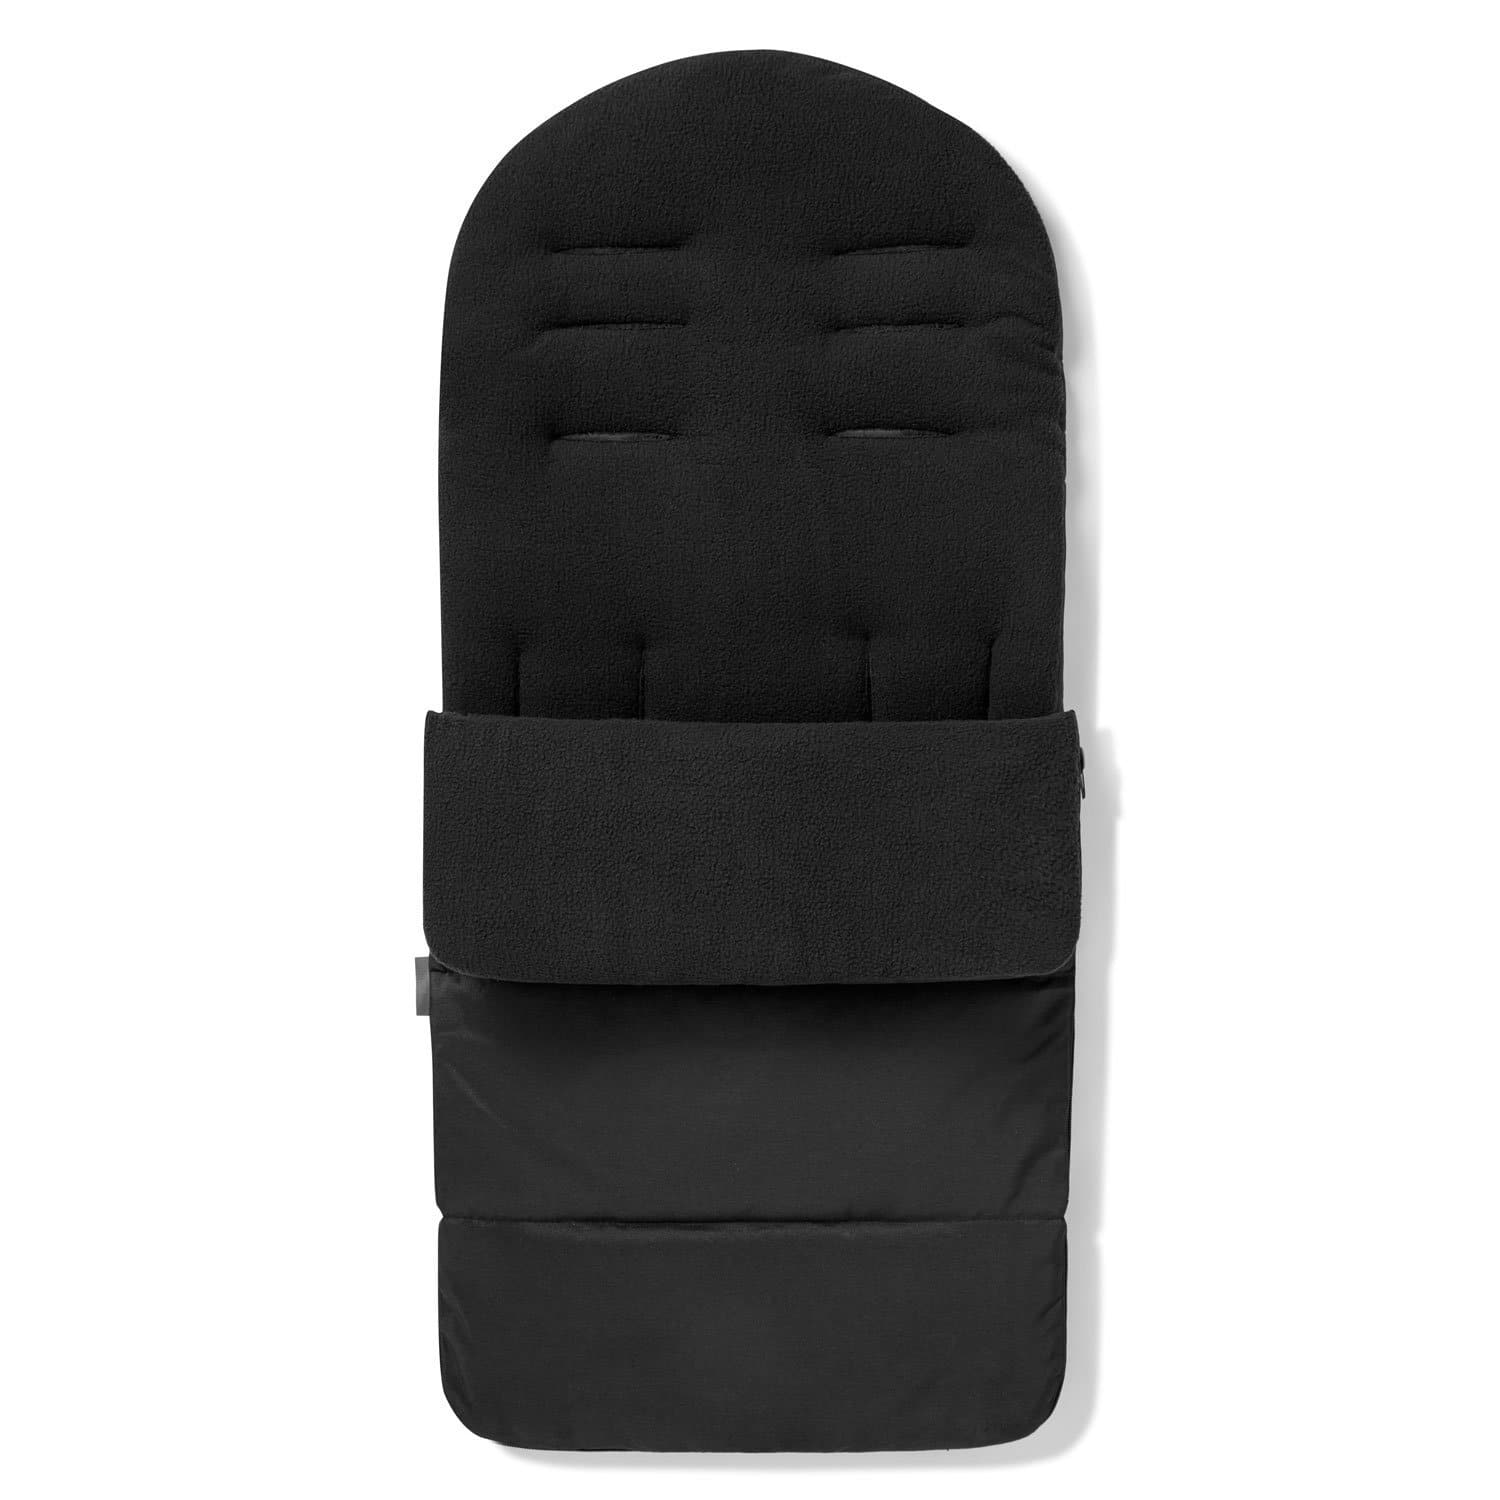 Premium Footmuff / Cosy Toes Compatible with Babyzen - Black Jack / Fits All Models | For Your Little One